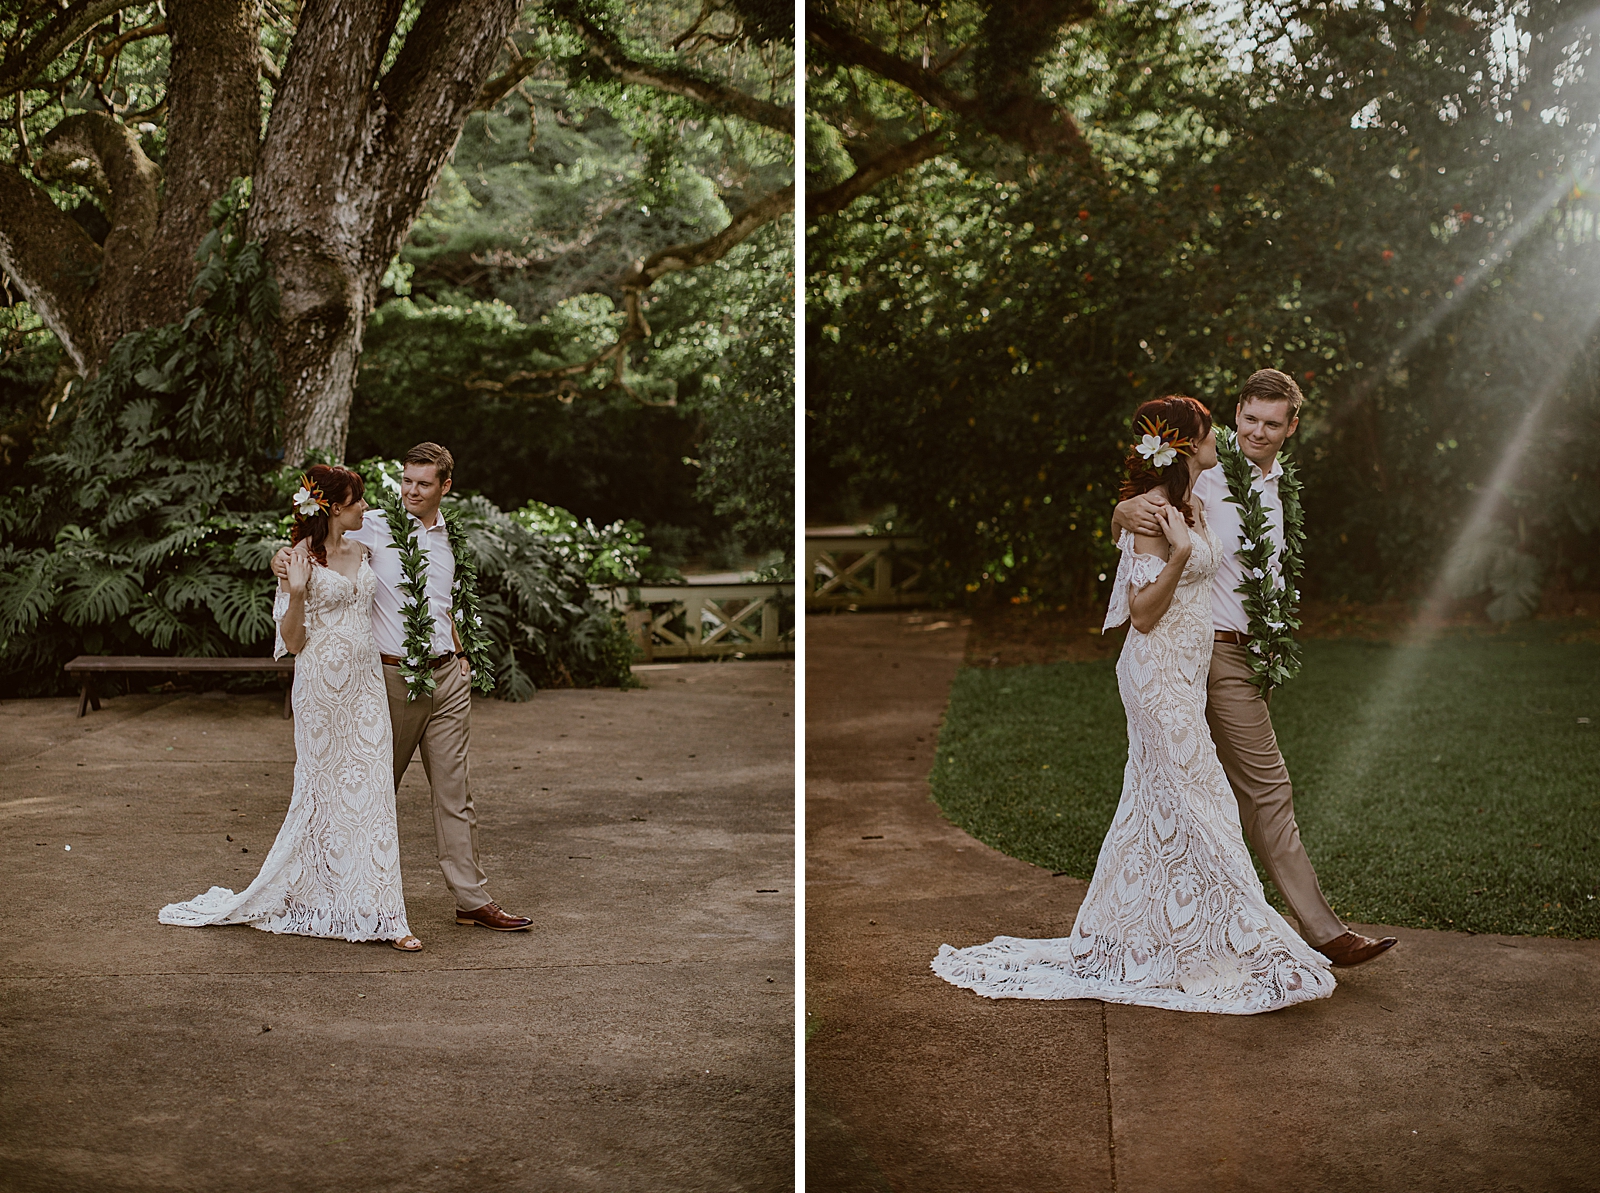 Bride and Groom with their arms around each other walking on sidewalk